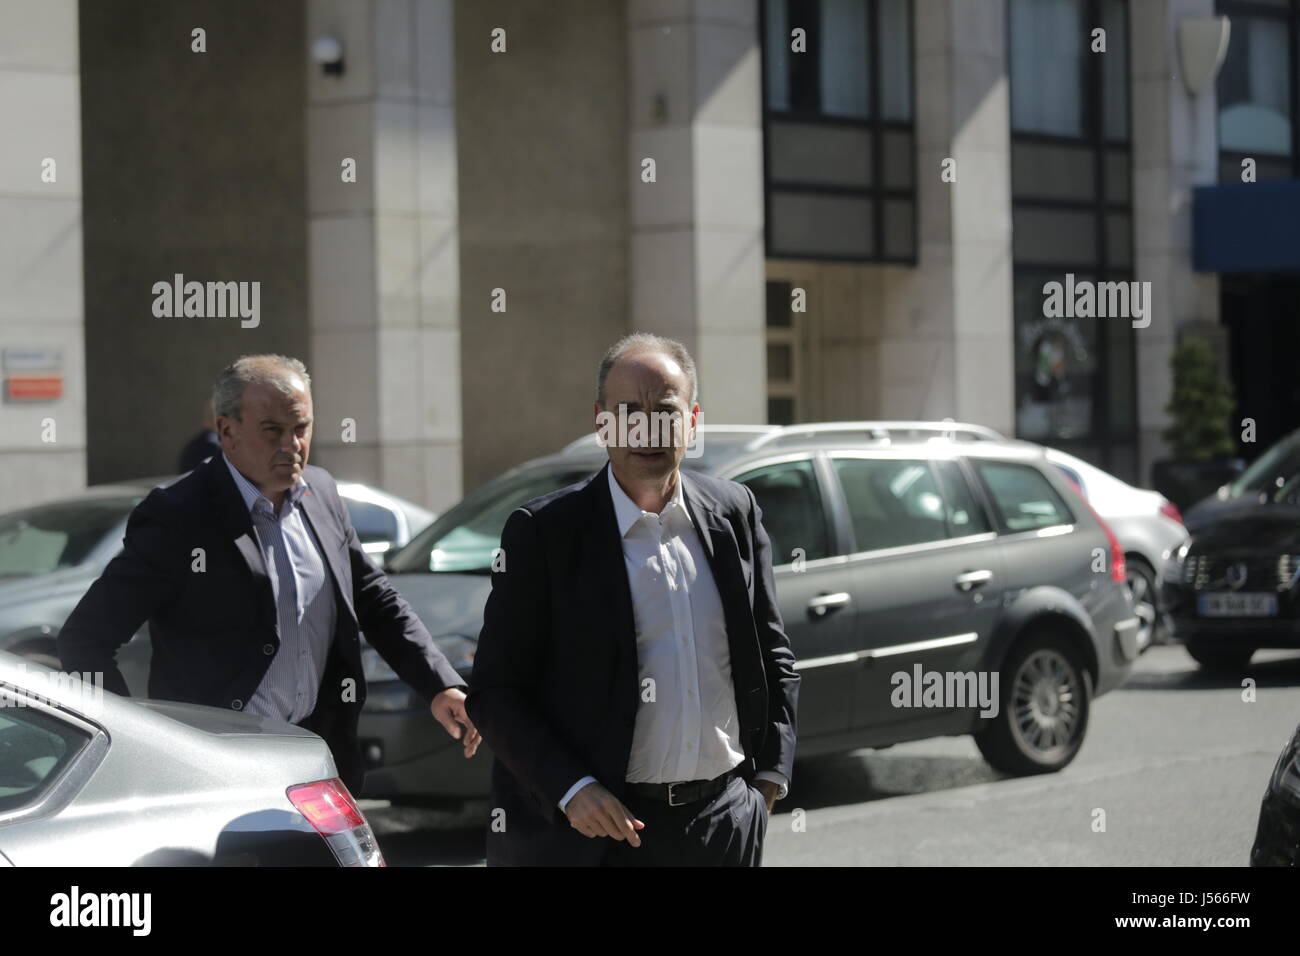 Arrival of the leaders of the party The Republicans at their headquarters  -  16/05/2017  -  France / Paris  -  The Republicans meet at their headquarters in the 15th arrondissement of Paris following the appointment of Edouard Philippe as Prime Minister Credit: LE PICTORIUM/Alamy Live News Stock Photo